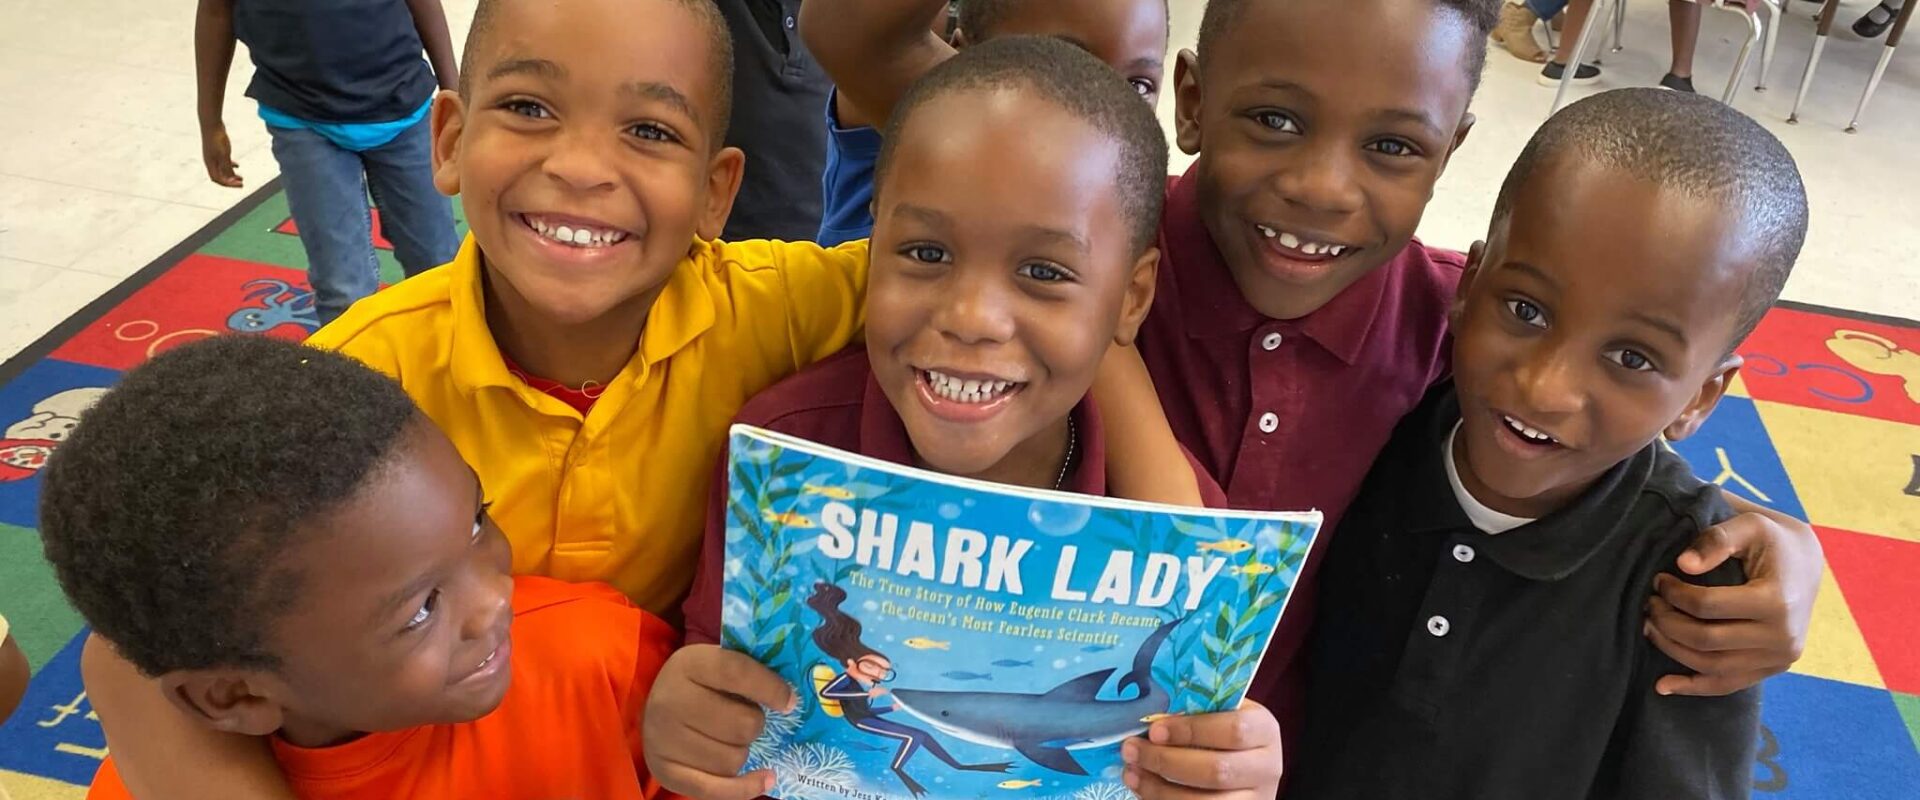 Kids reading about sharks in class